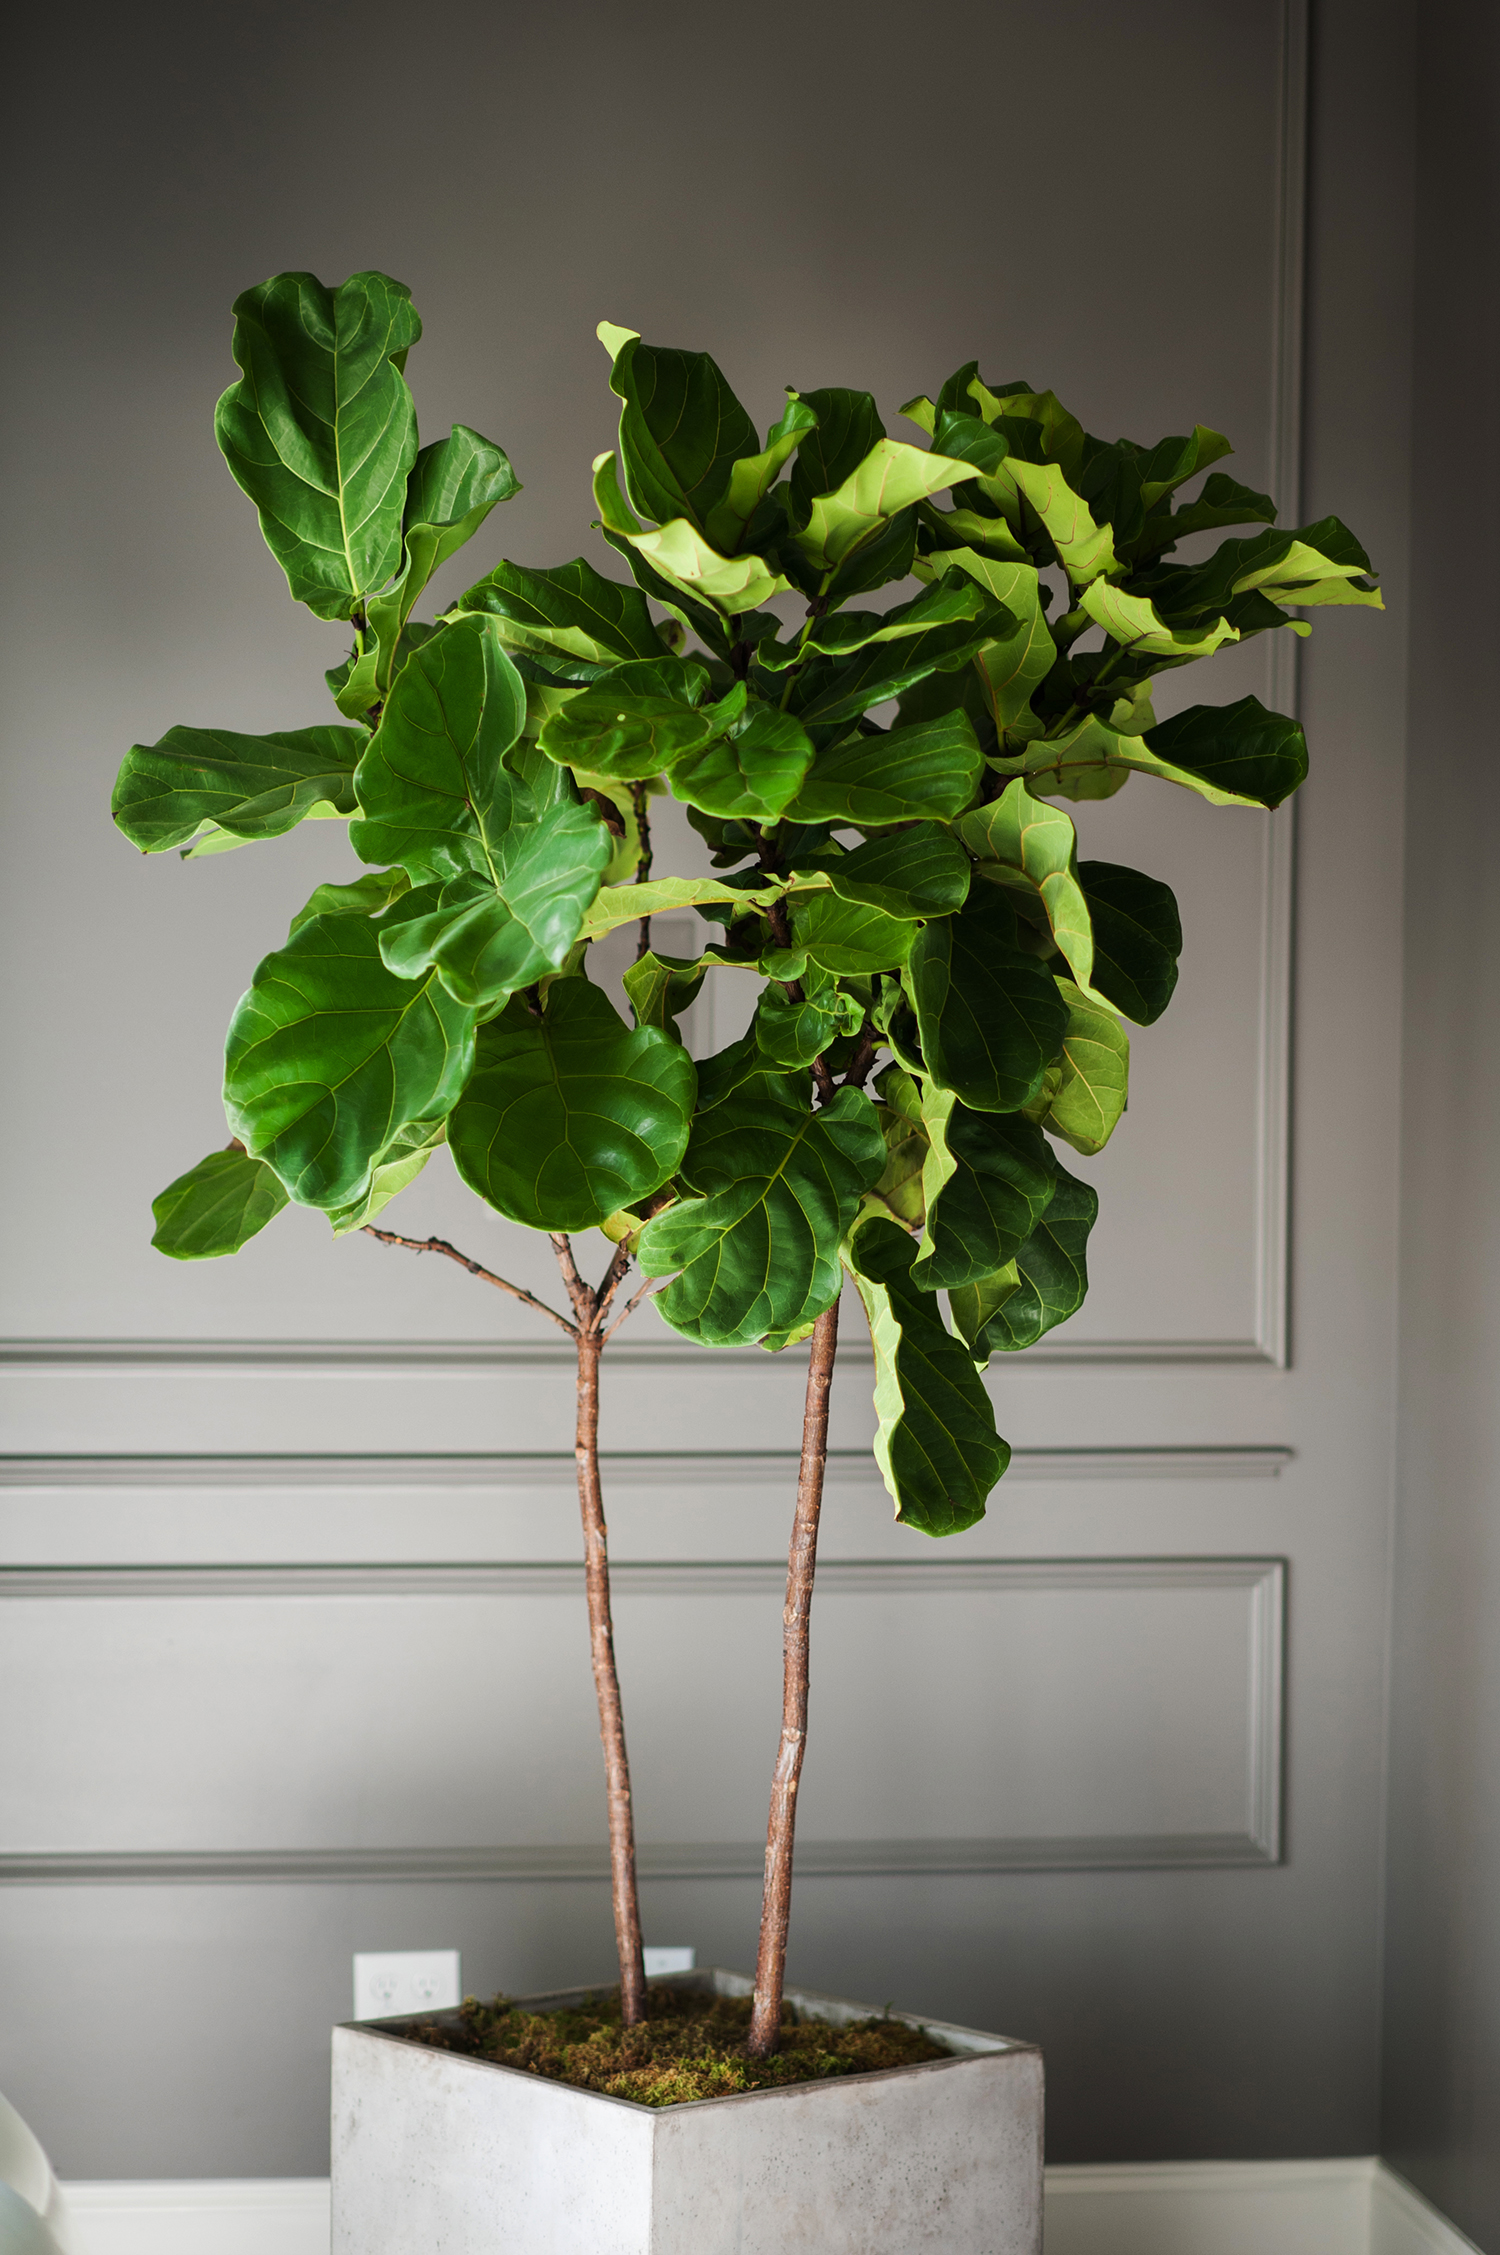 Top 5 Indoor Plants and How to Care for Them